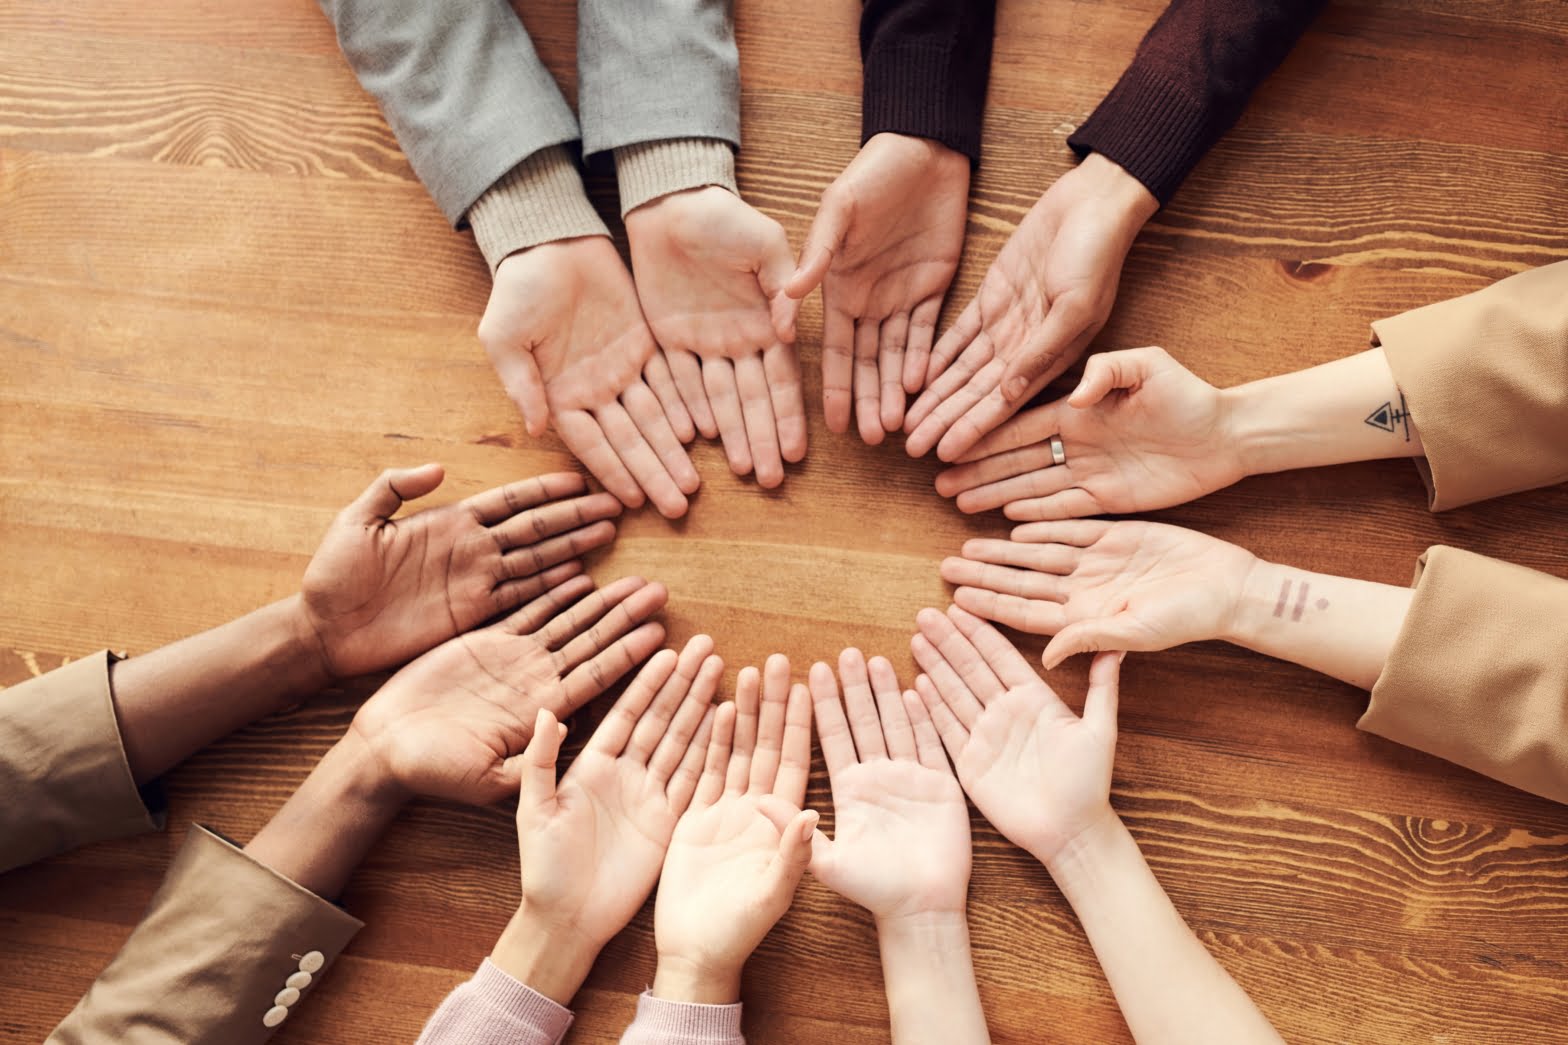 a group of people place their hands in a circle, indicating the help that a group session may provide